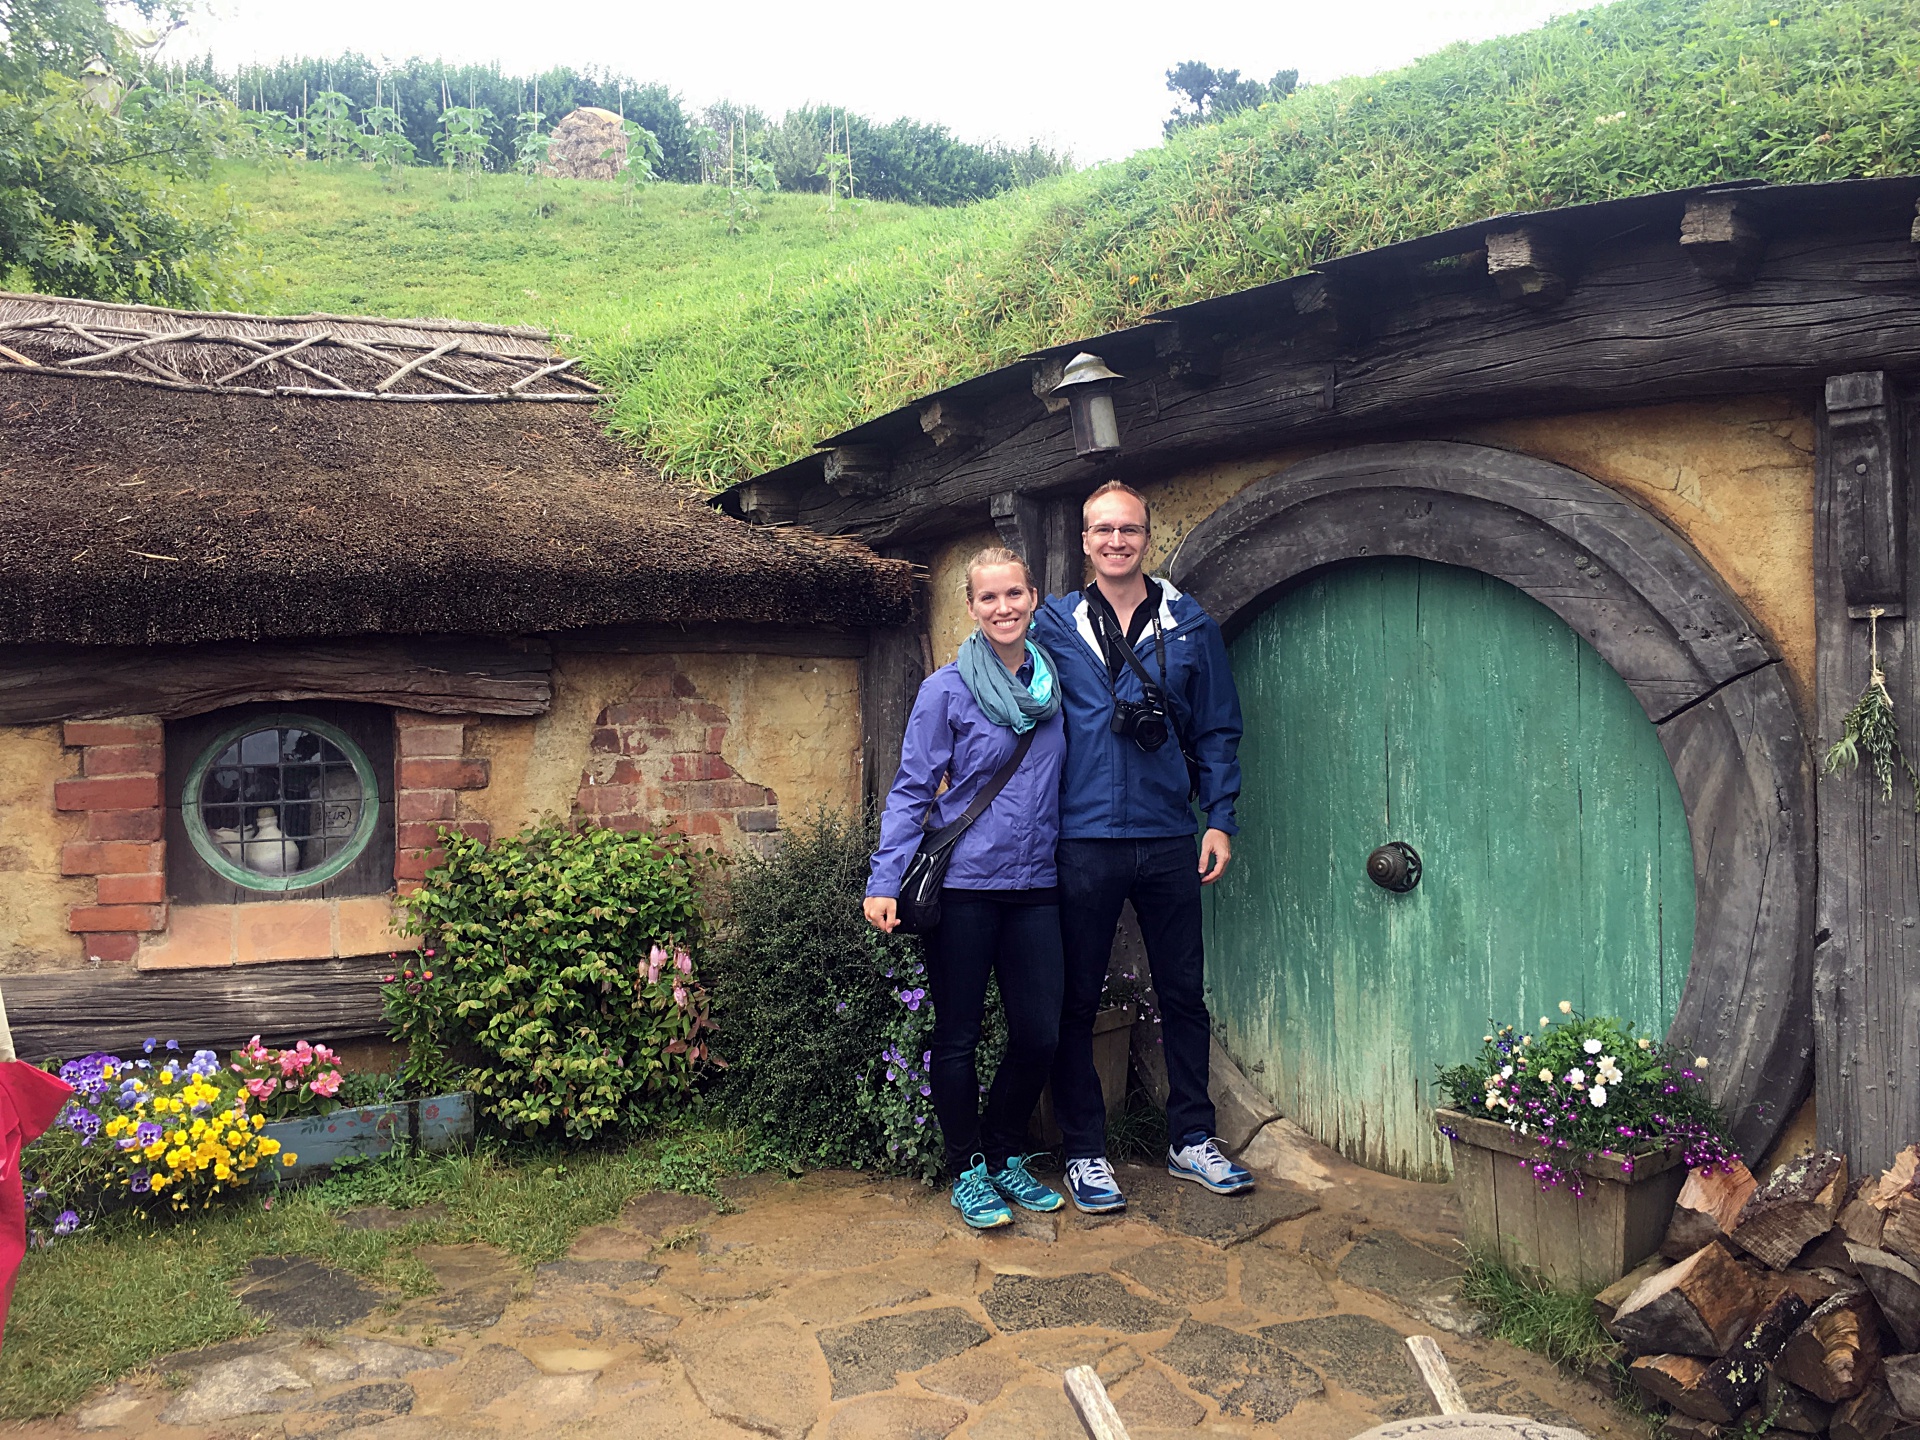 Us in front of a Hobbit Hole